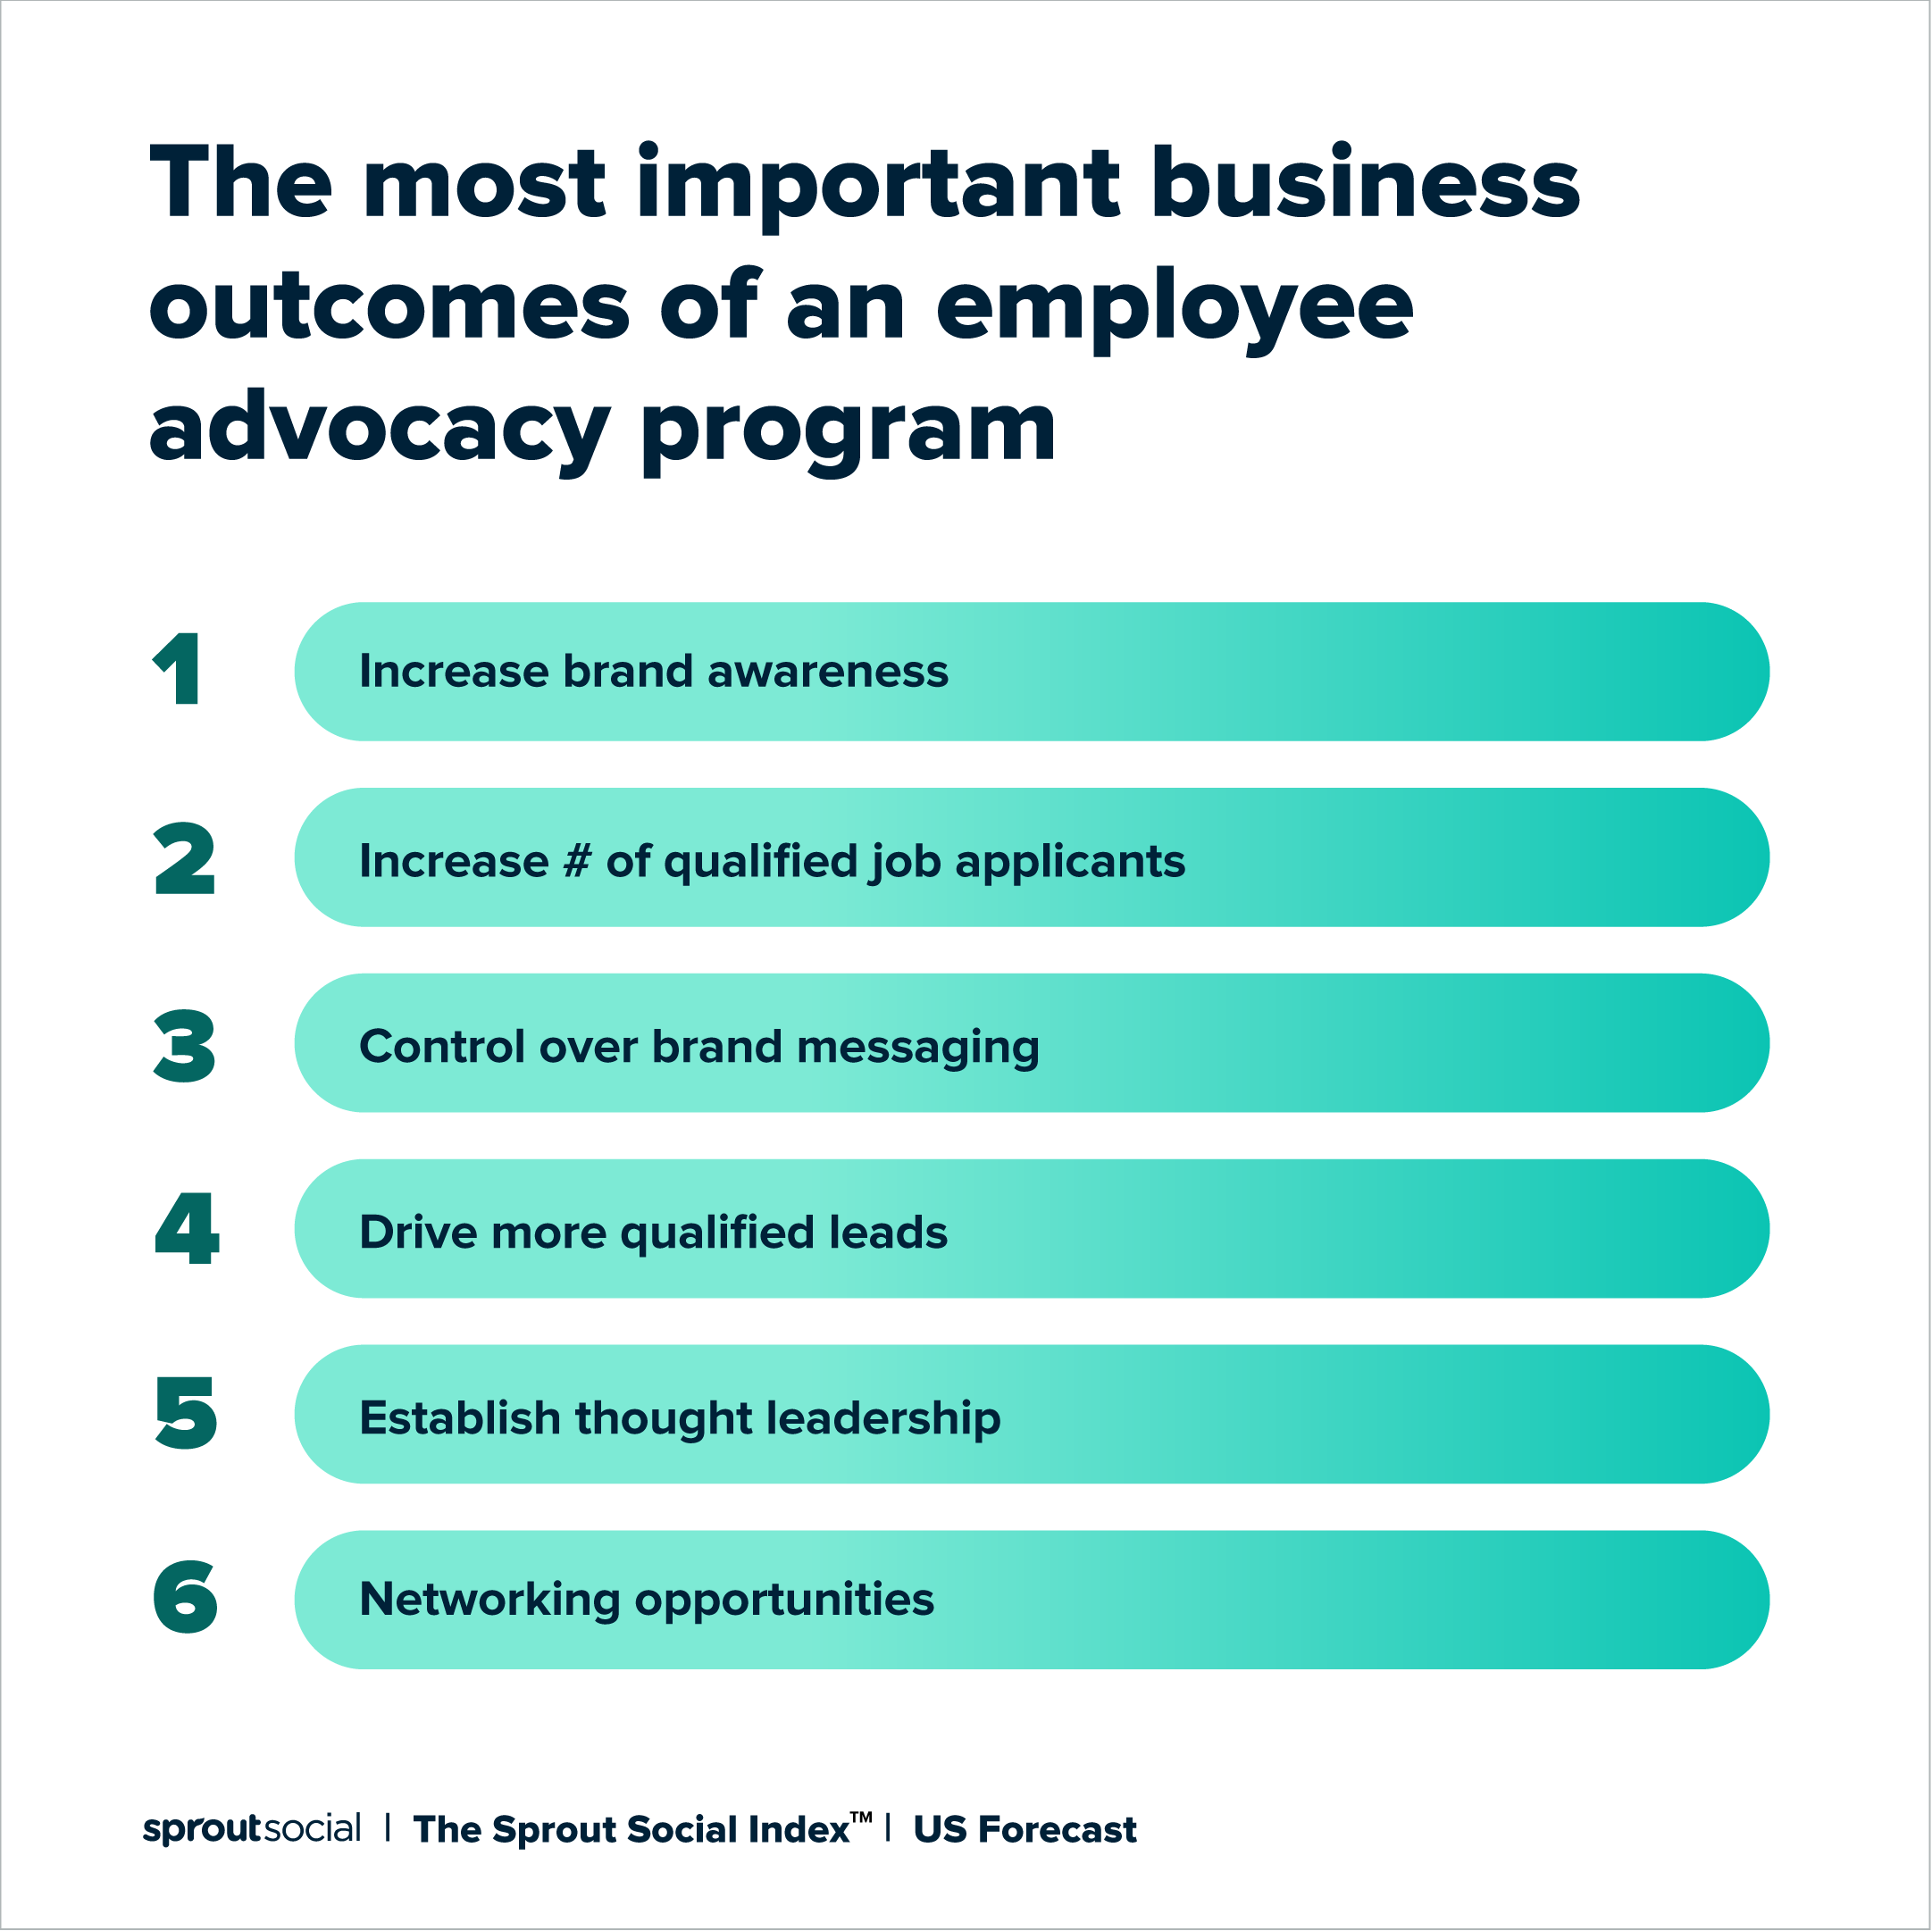 A graphic of the most important business outcomes of an employee advocacy program. The reasons listed include increase brand awareness, increase # of qualified job candidates, control over brand messaging, drive more qualified leads, establish thought leadership and networking opportunities. The data is from the 2022 Sprout Social Index™.